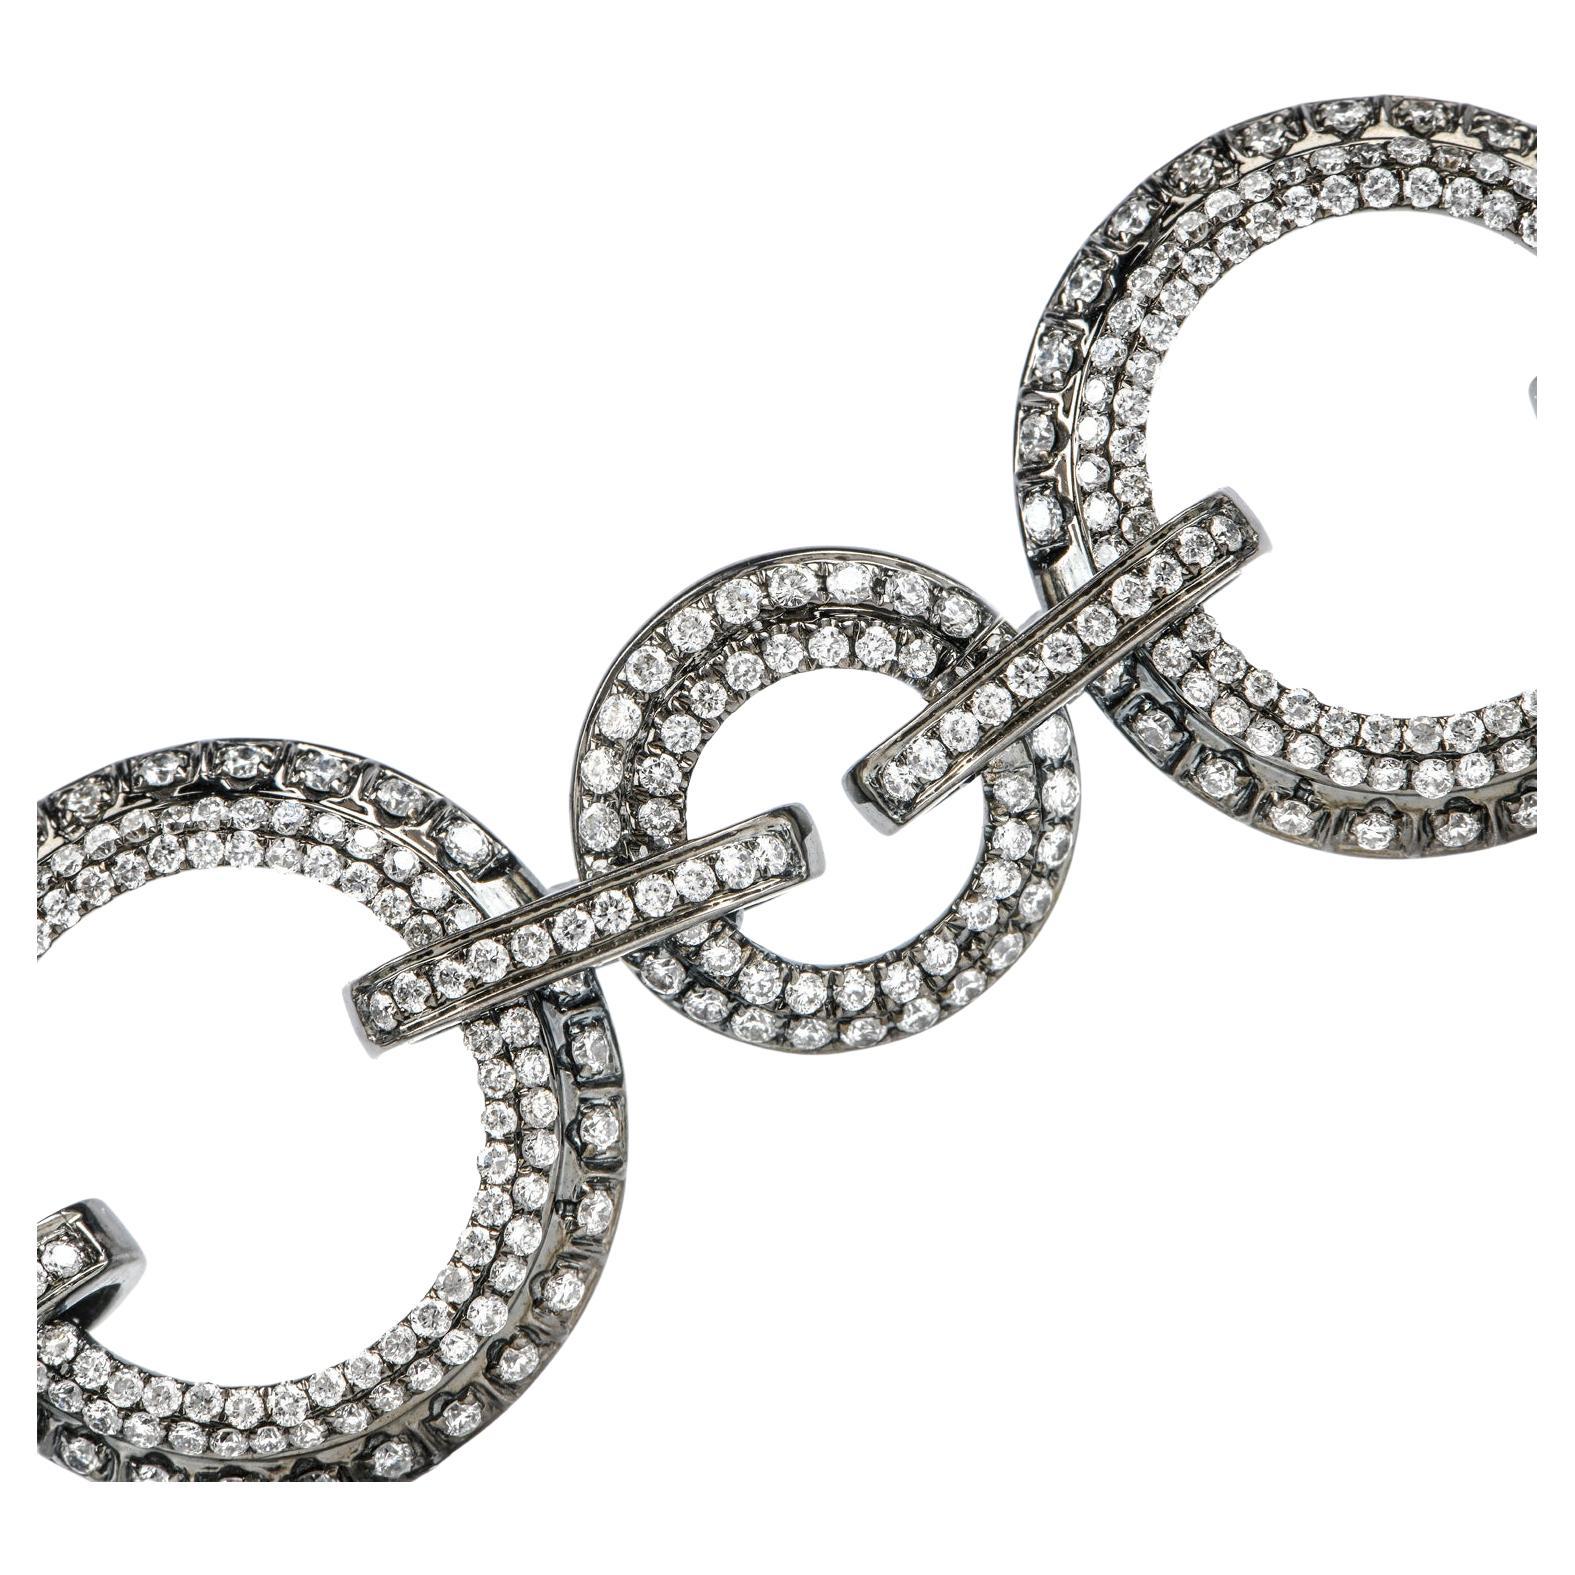 Feel flirty and daring with this fashionable Estate Diamond 18K Gold Circle Chain Link Bracelet.  This bracelet is crafted in the trending 18-karat white gold with chic black rhodium plating.  There are glimmering genuine white diamonds, round cut,